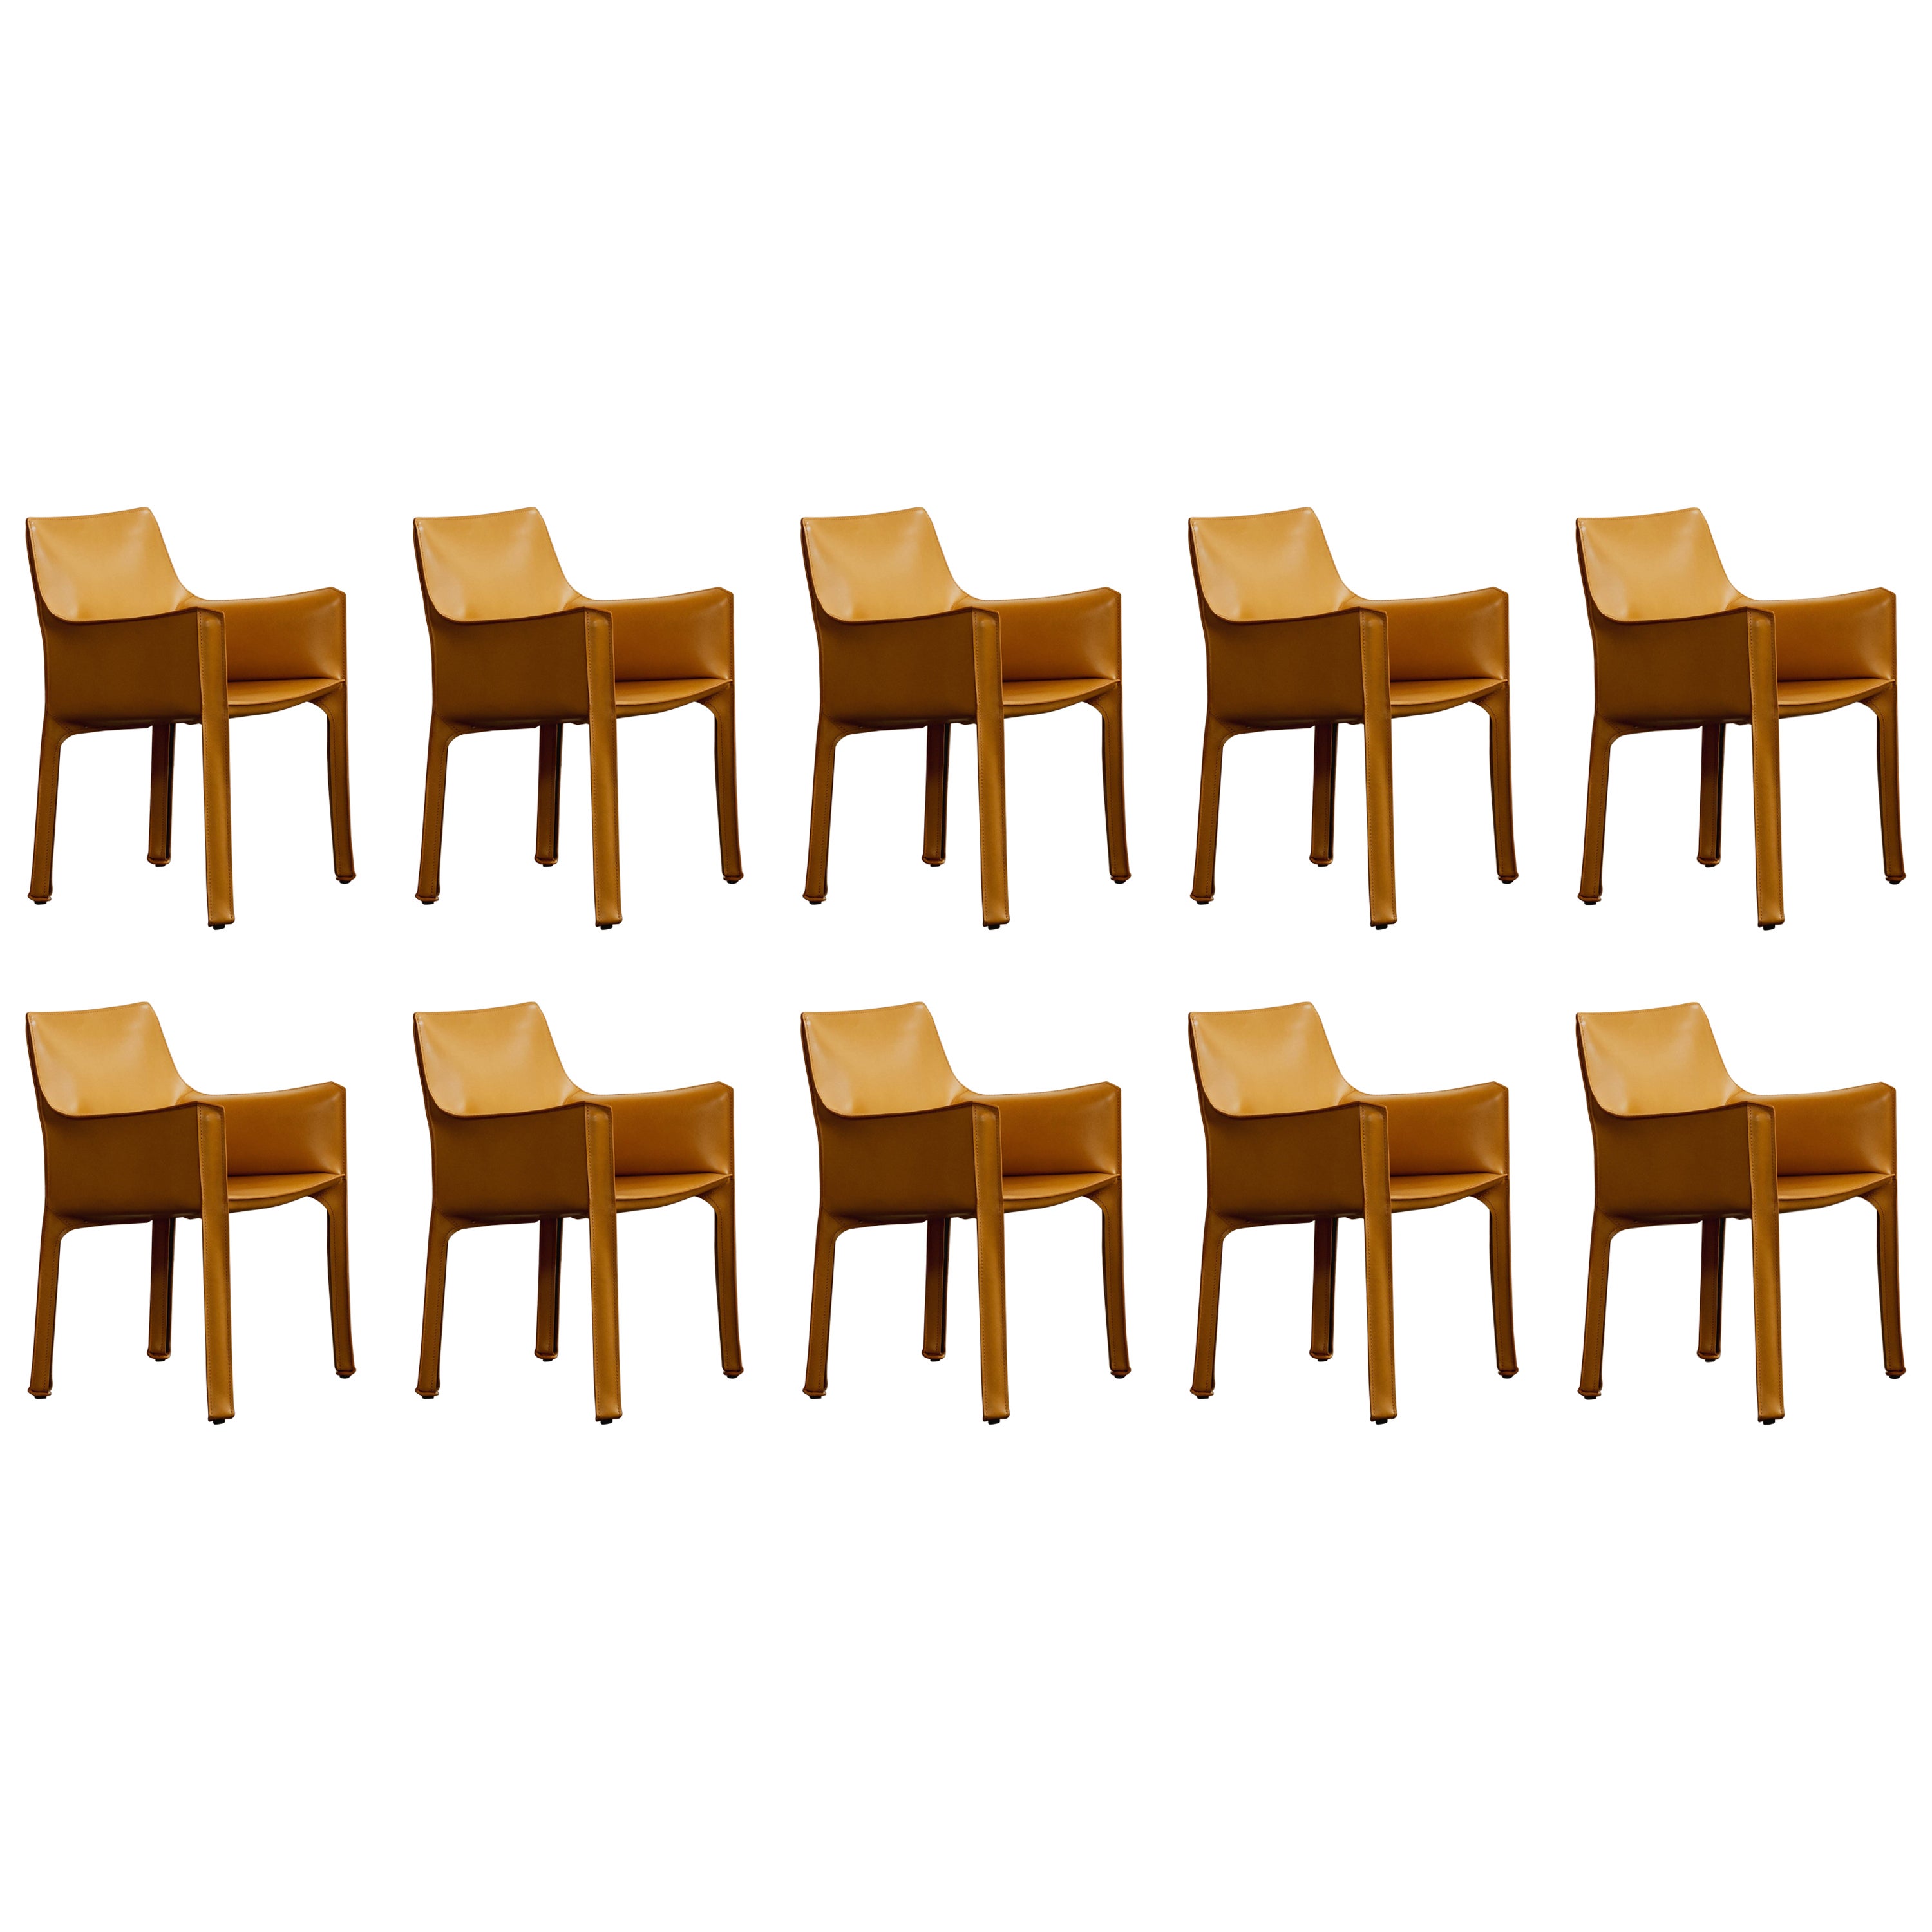 Mario Bellini "CAB 413" Dining Chairs for Cassina, 1977, Set of 10